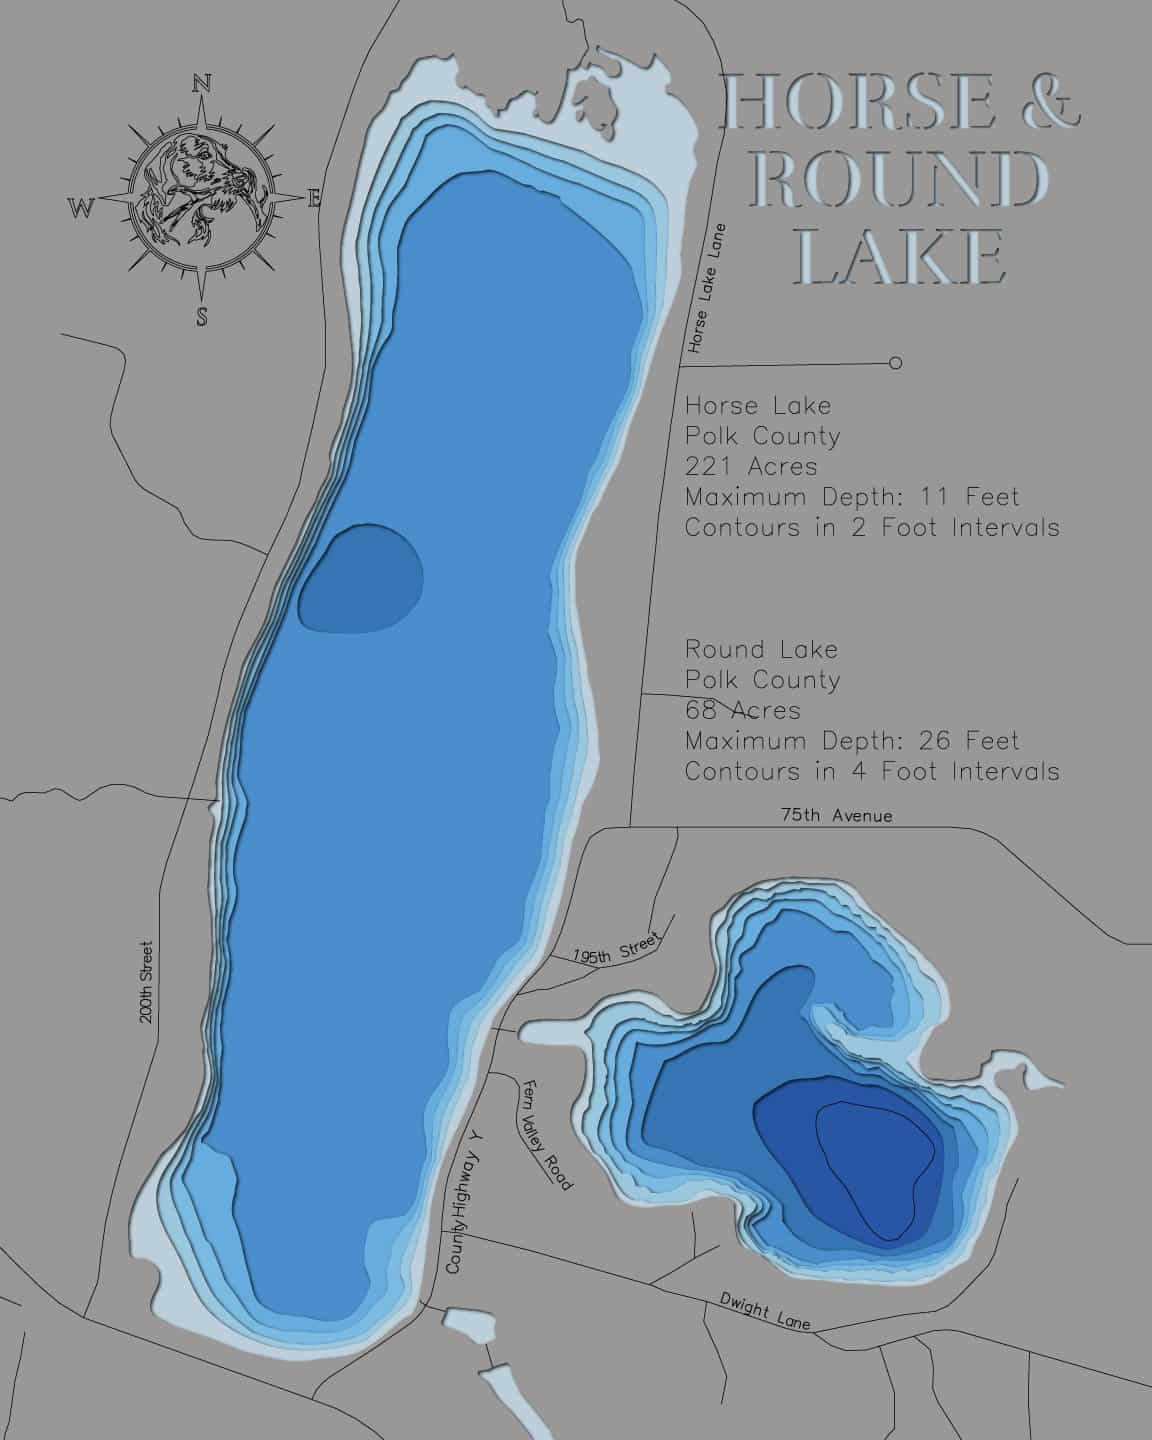 3d Depth Map of Horse and Round Lakes in Polk County, WI